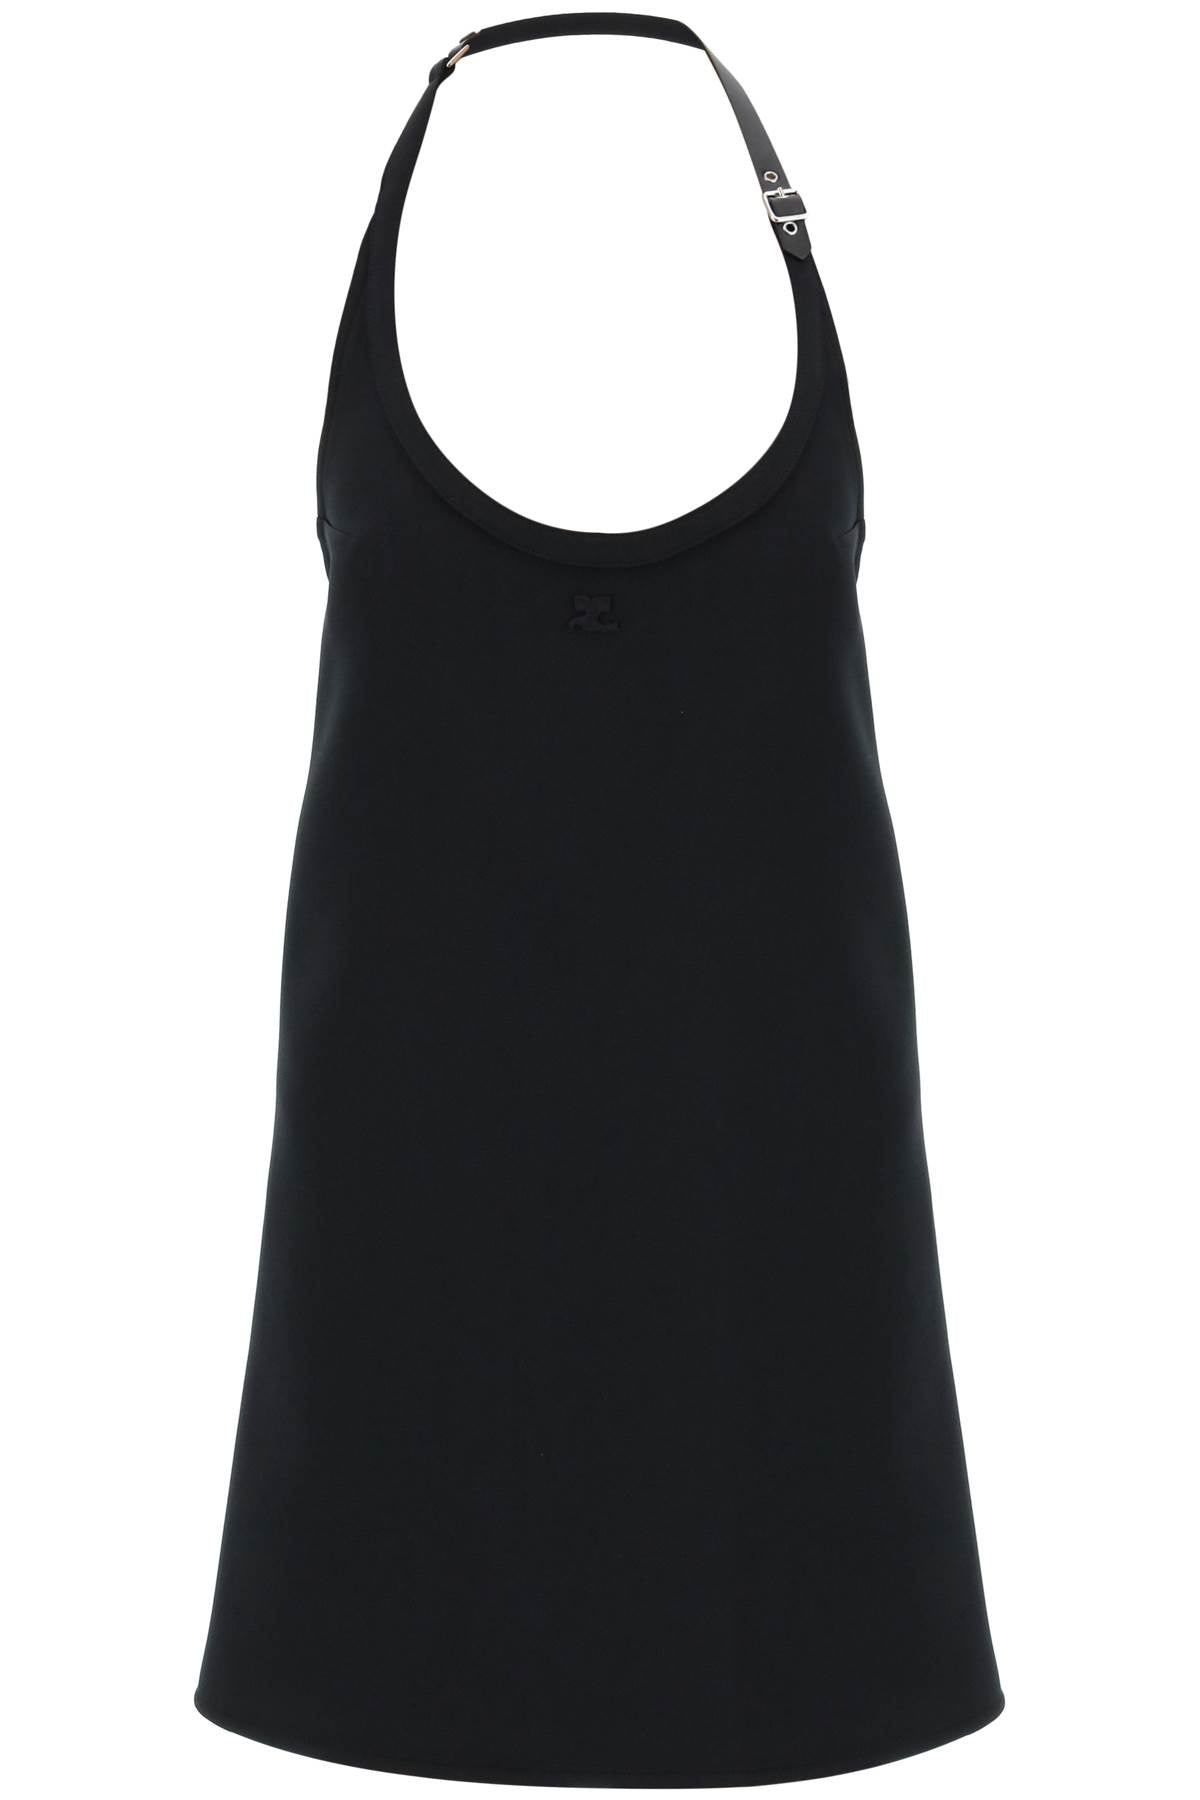 Courrèges mini dress with strap and buckle detail. 124CRO377PL00079999